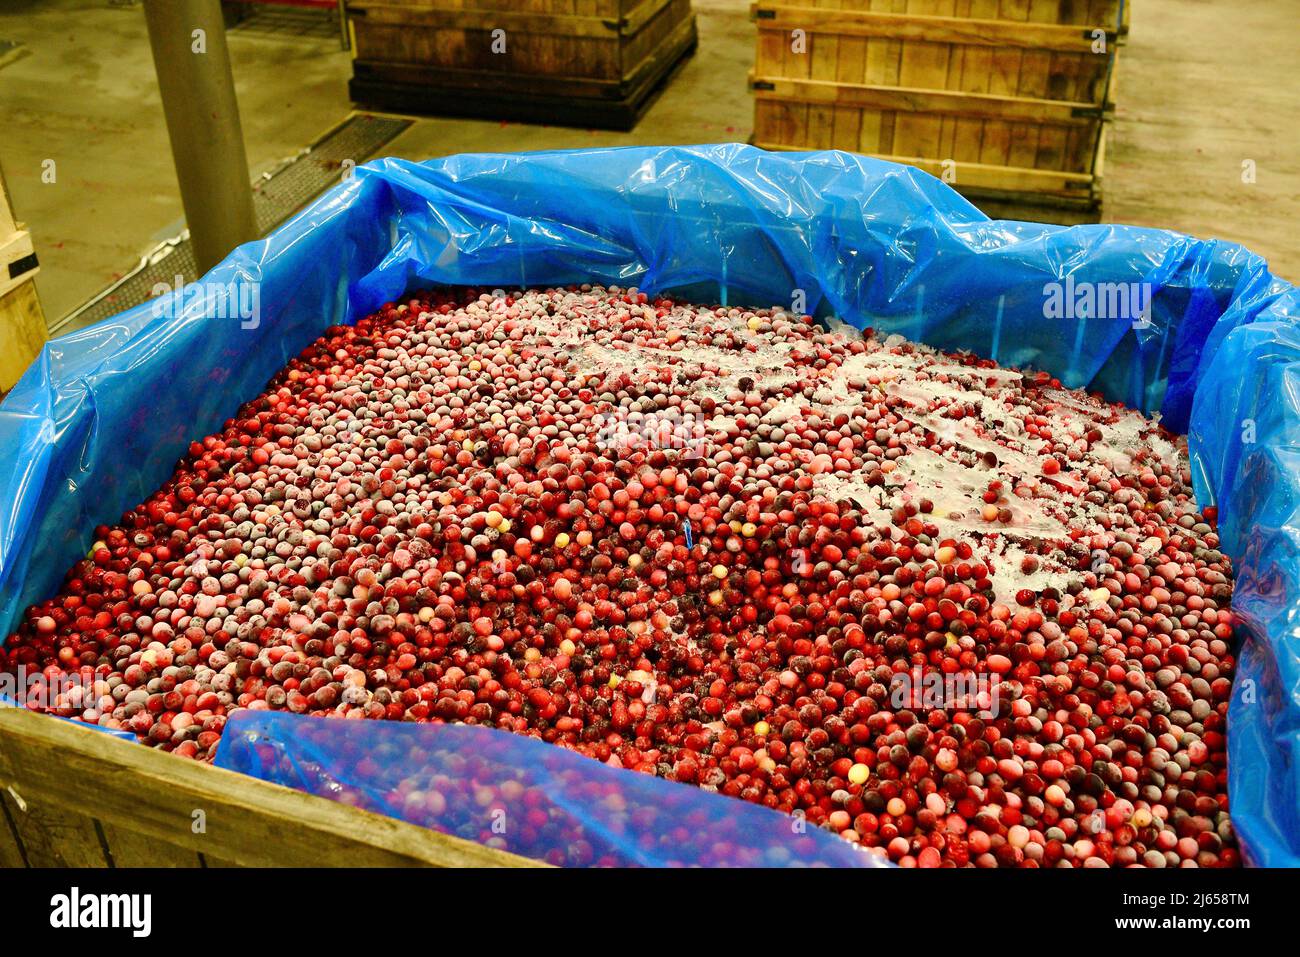 Processing of cranberries at the modern and state-of-the-art Ocean Spray plant in Wisconsin Rapids, Wisconsin, USA Stock Photo